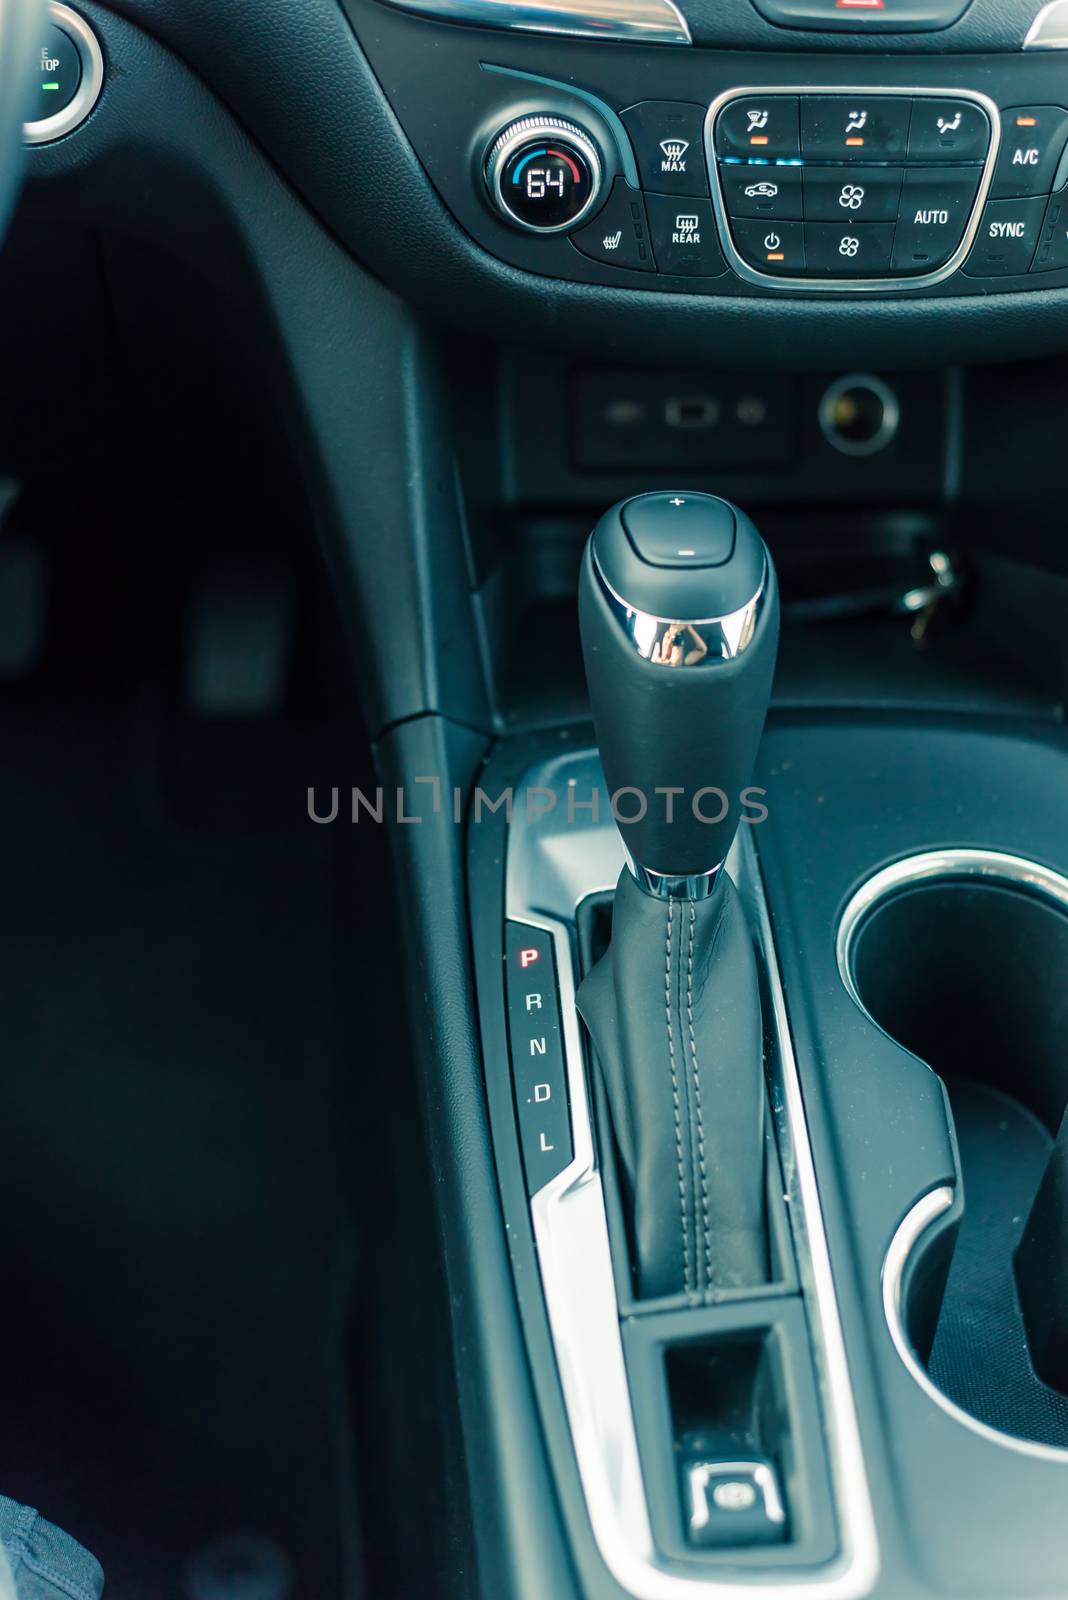 Vintage tone close-up top view automatic gear stick of a modern car. Automatic transmission in Parking, parked P mode.